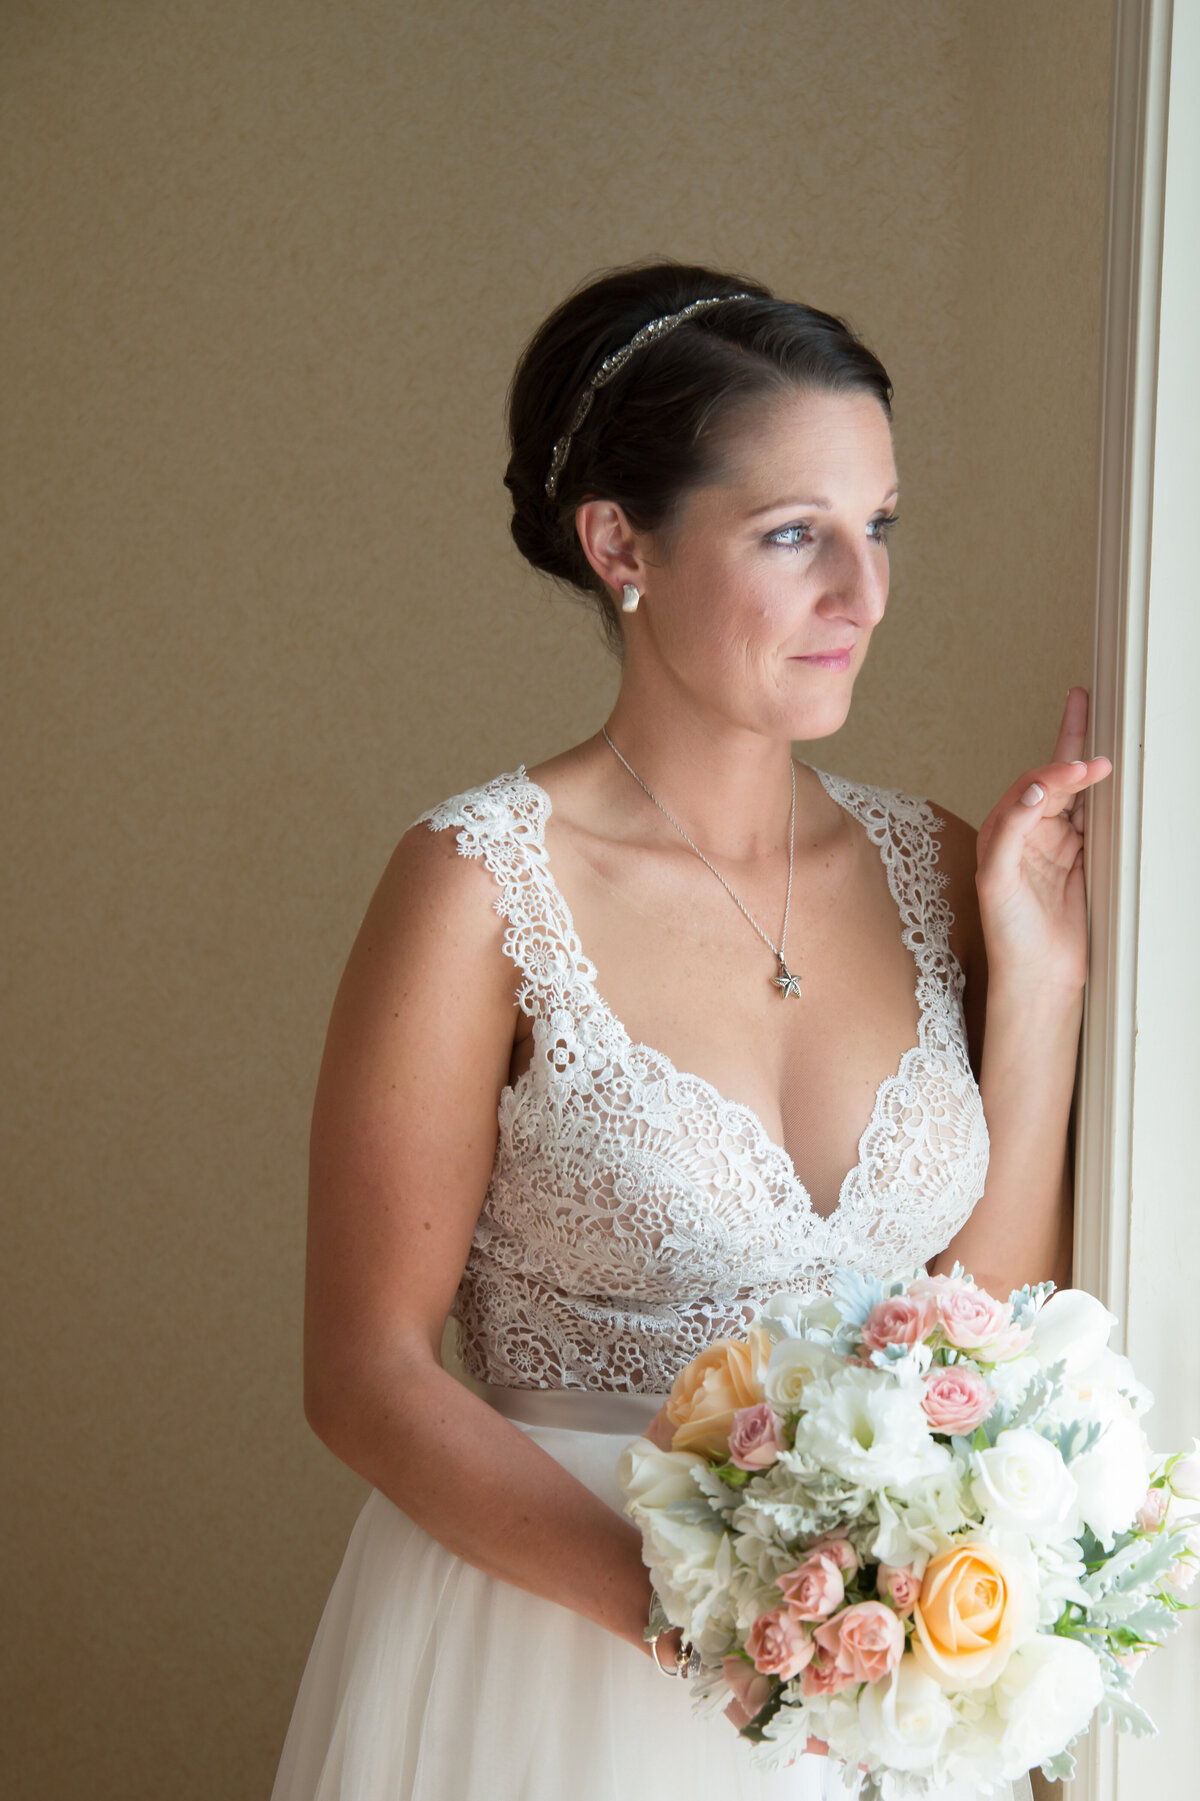 Bride before her wedding looking out the window